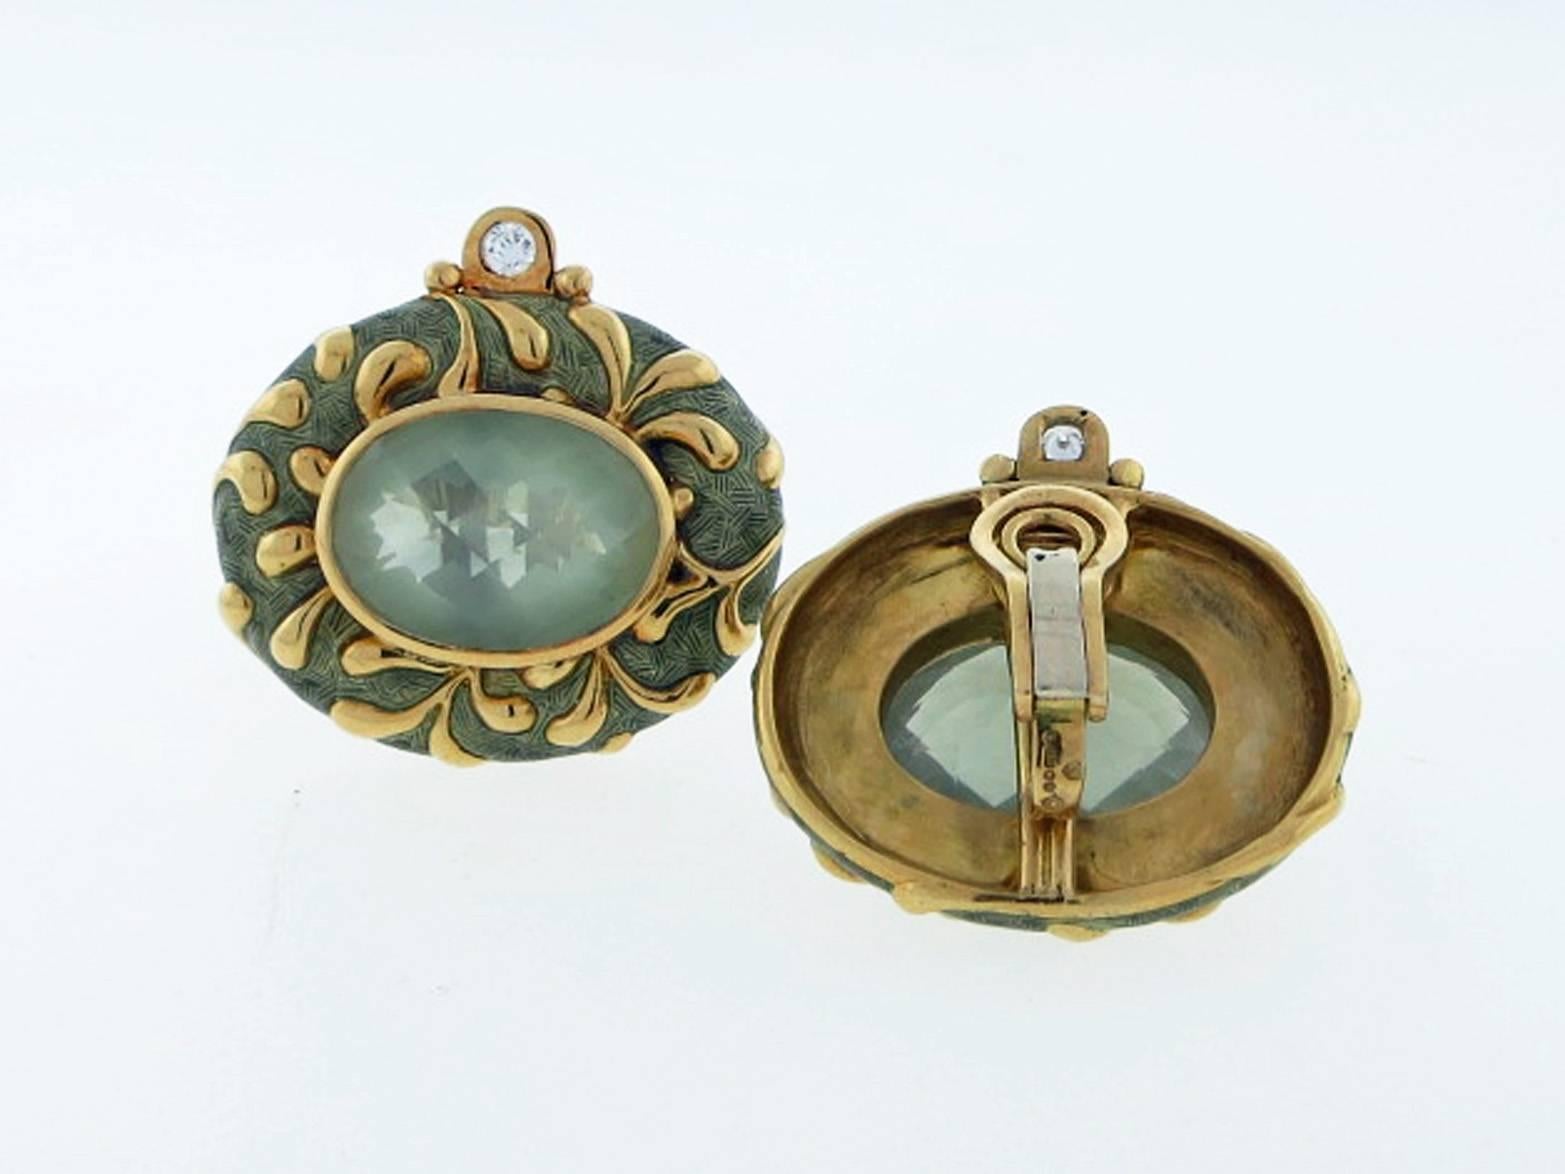 18kt. yellow gold Elizabeth Gage earrings with an enameled frame. Each measuring  approx.1.25 inches in length and  set with an oval faceted top,  subtly hued quartz weighing approx 12. cts. The top of the frame set with a round brilliant cut